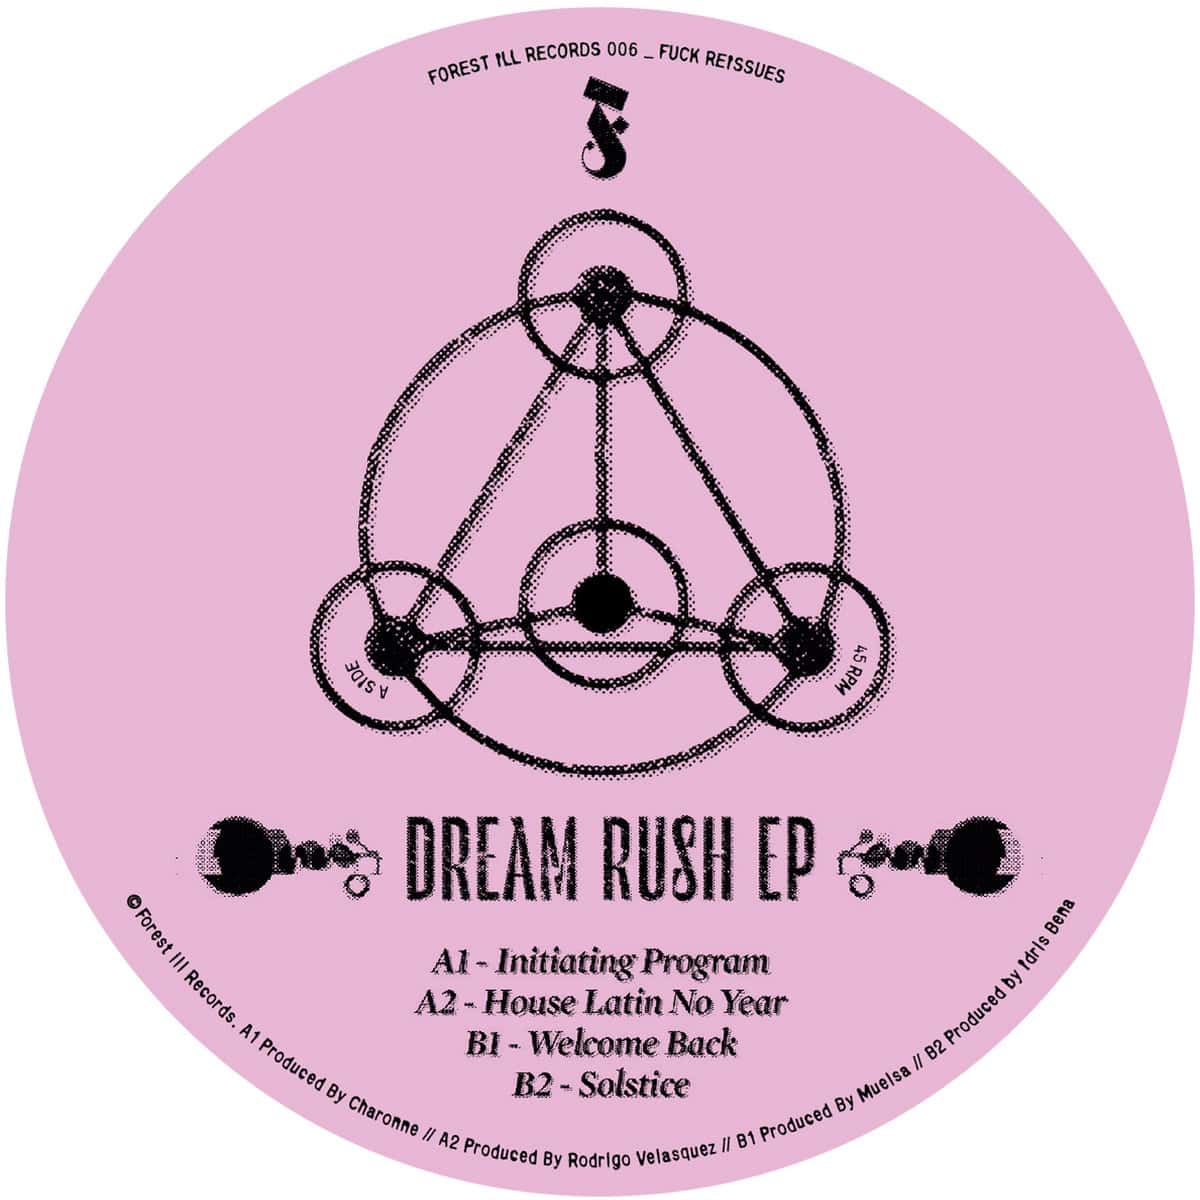 image cover: Various Artists - Dream Rush EP / Forest ill Records